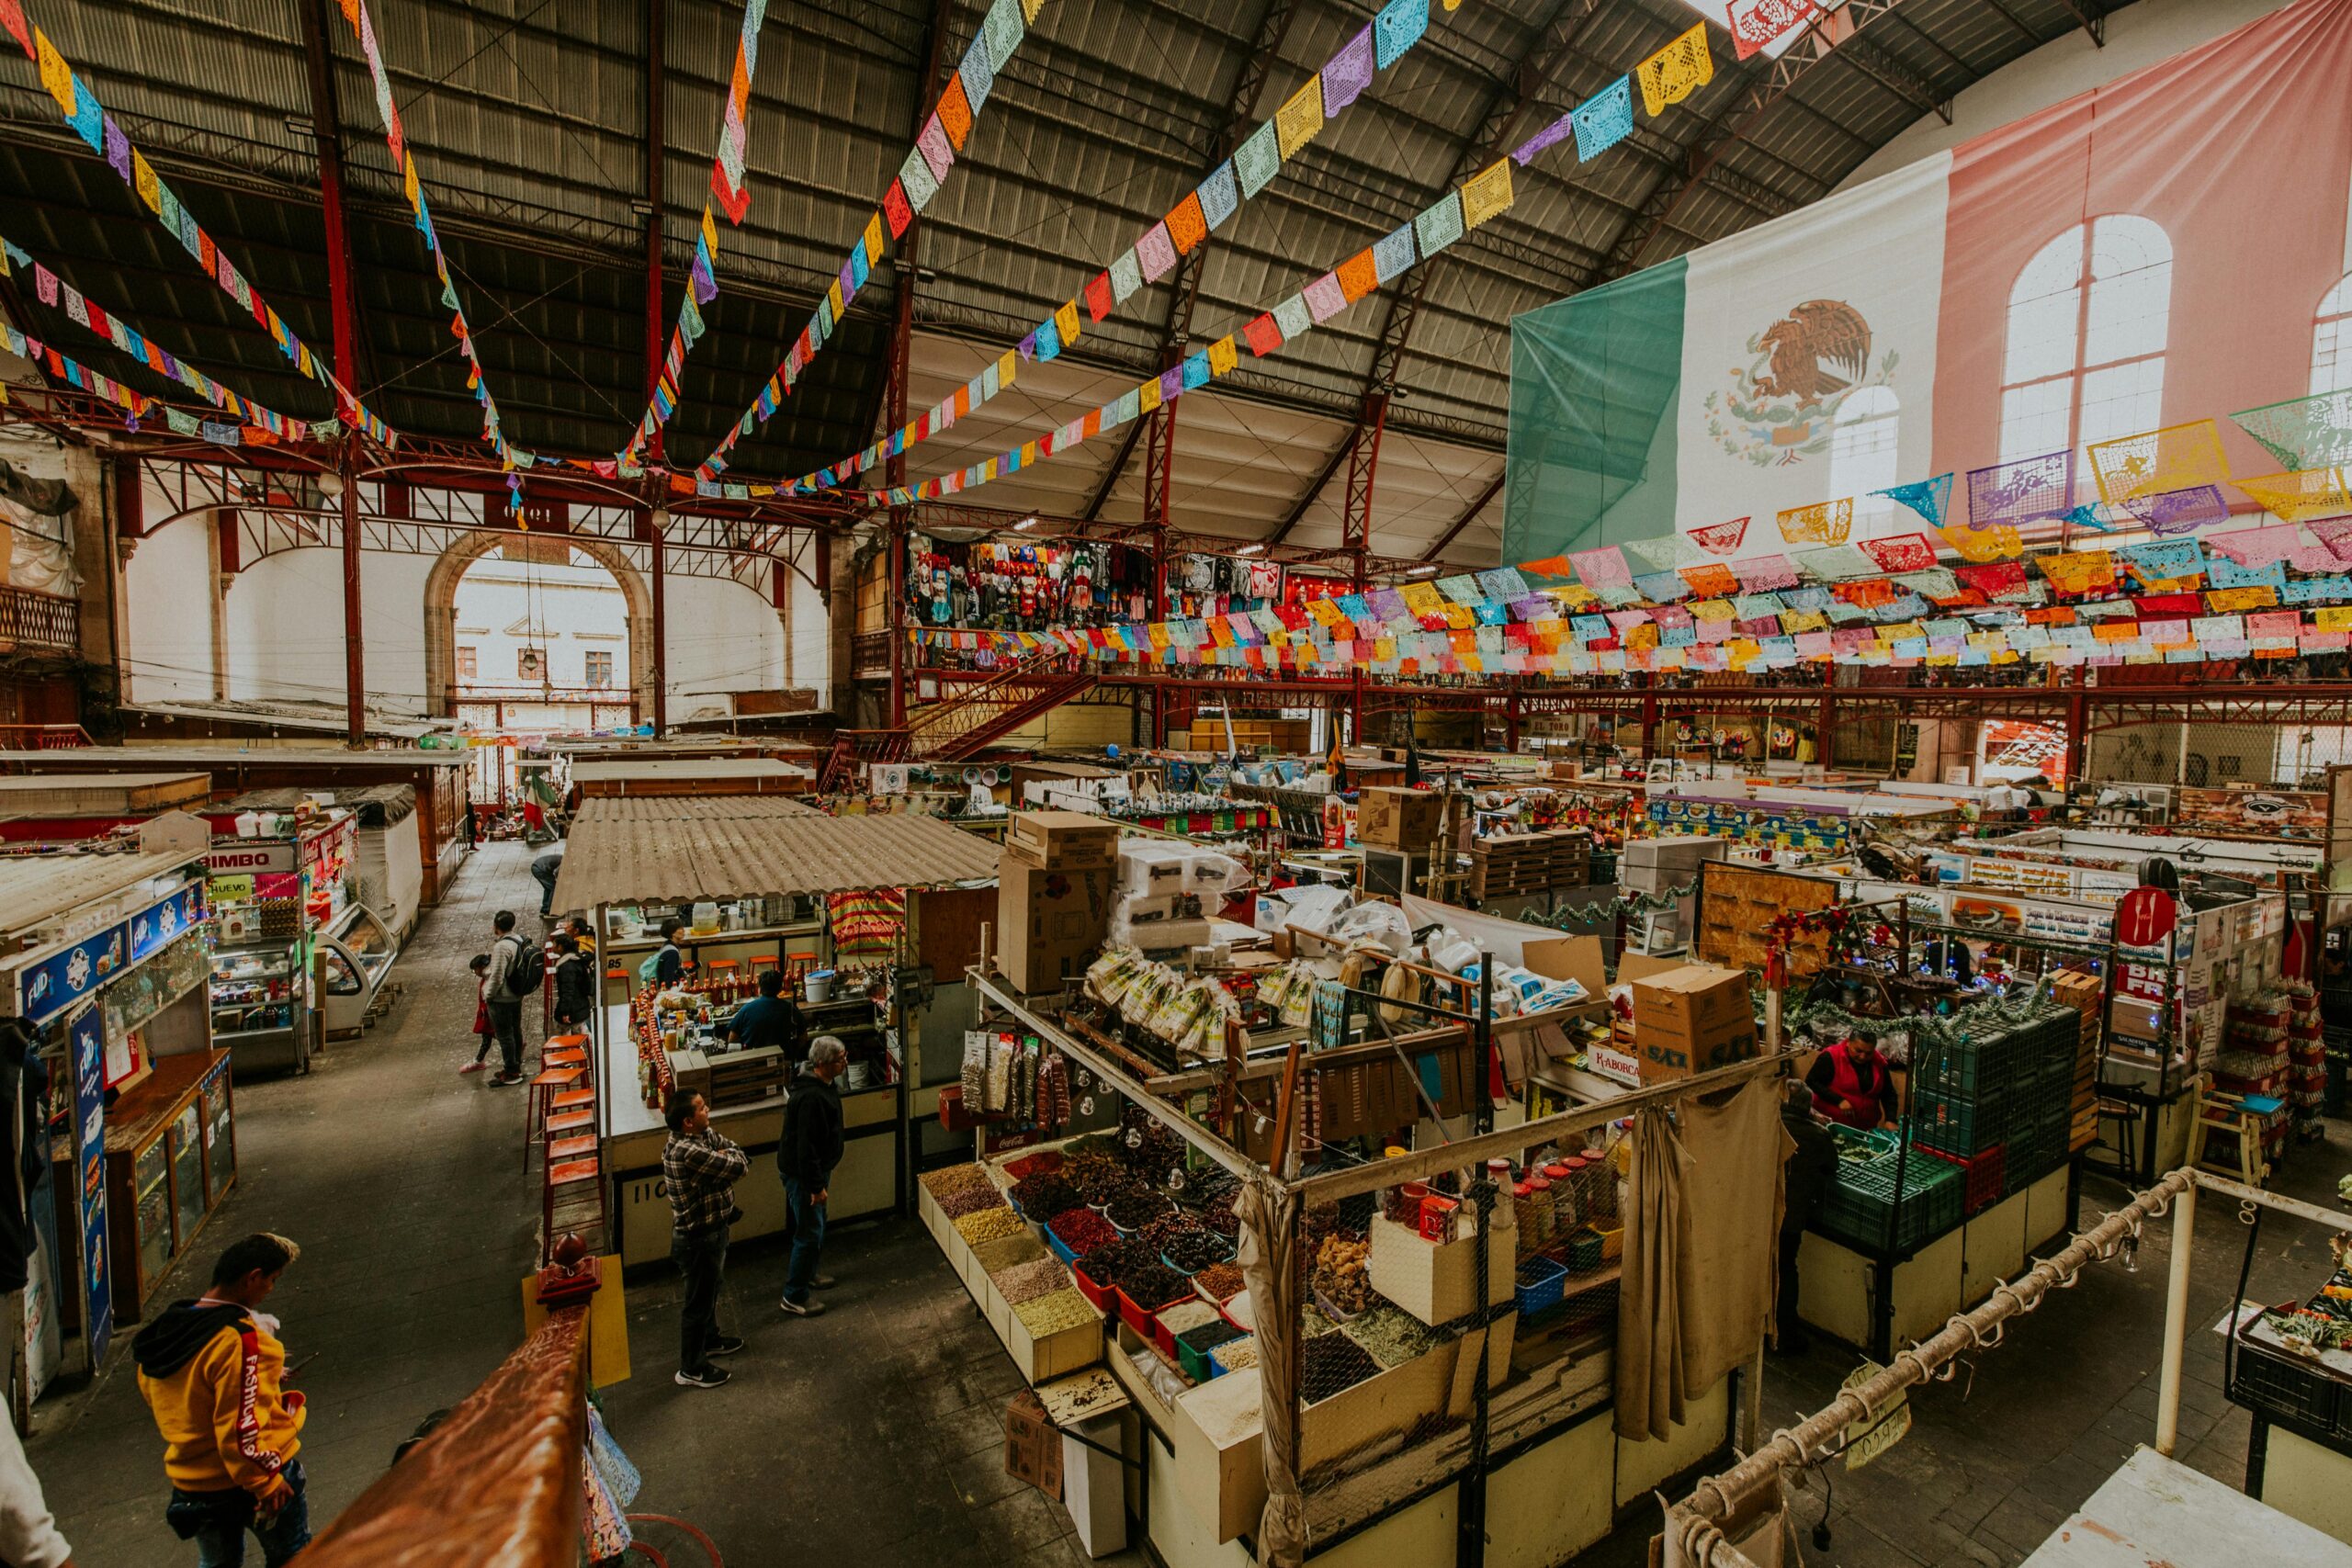 The Olas Altas Farmers Market is one of the reasons that travelers should visit Puerto Vallarta in May. 
pictured: a market in Mexico 